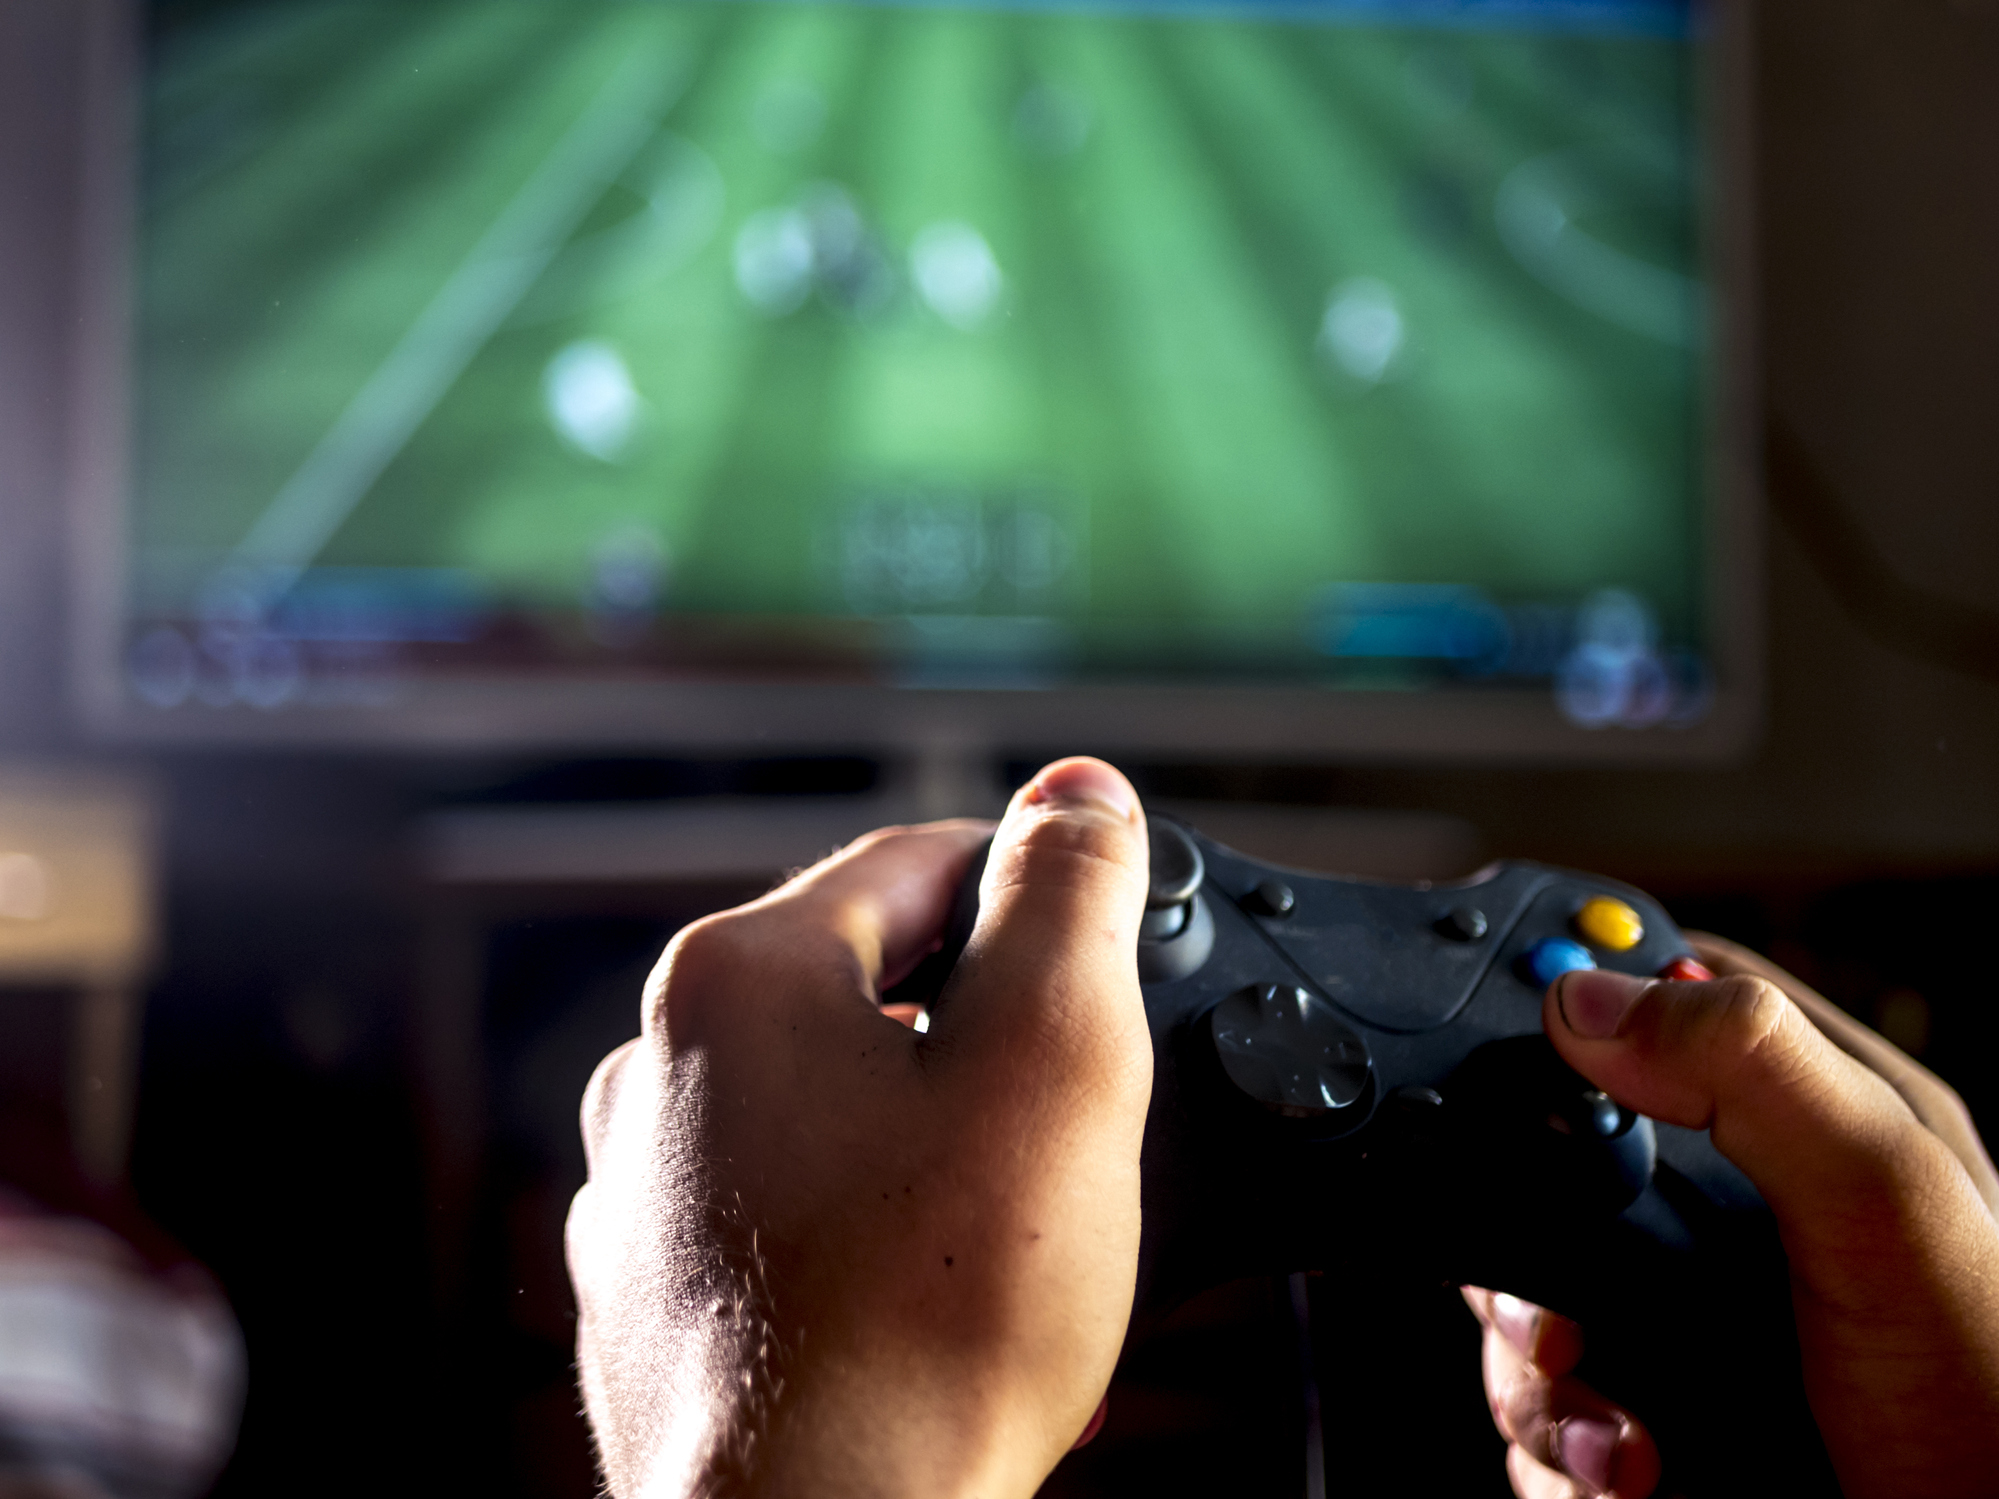 close up young man with joystick controller for console playing sport simulator video game on large screen